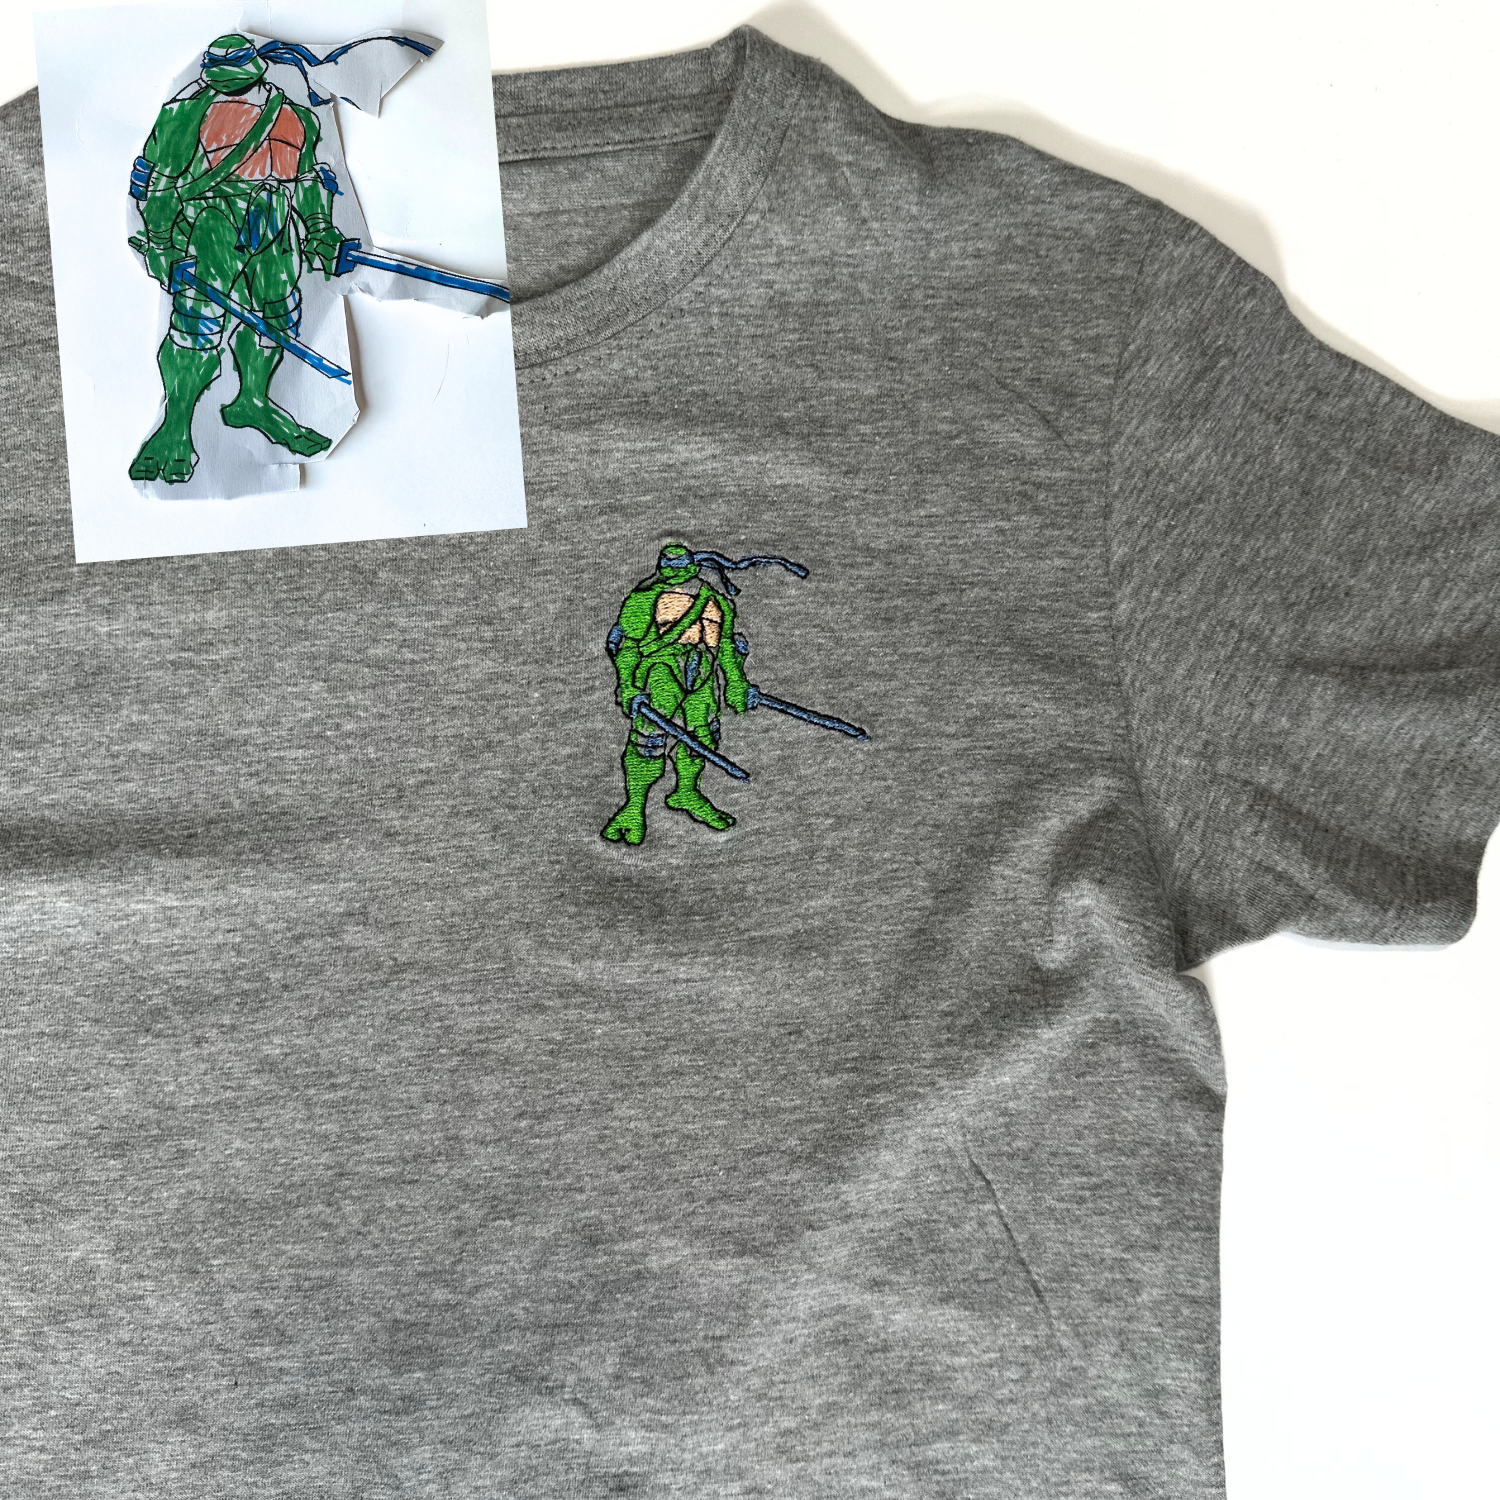 "Make your child's t-shirt extra special with their own photo transformed into a colorful, vibrant embroidery. Simply upload the photo and we will carefully match each color and stitch it onto the t-shirt. A unique way to showcase your child's favorite memory and create a truly personalised wardrobe staple.